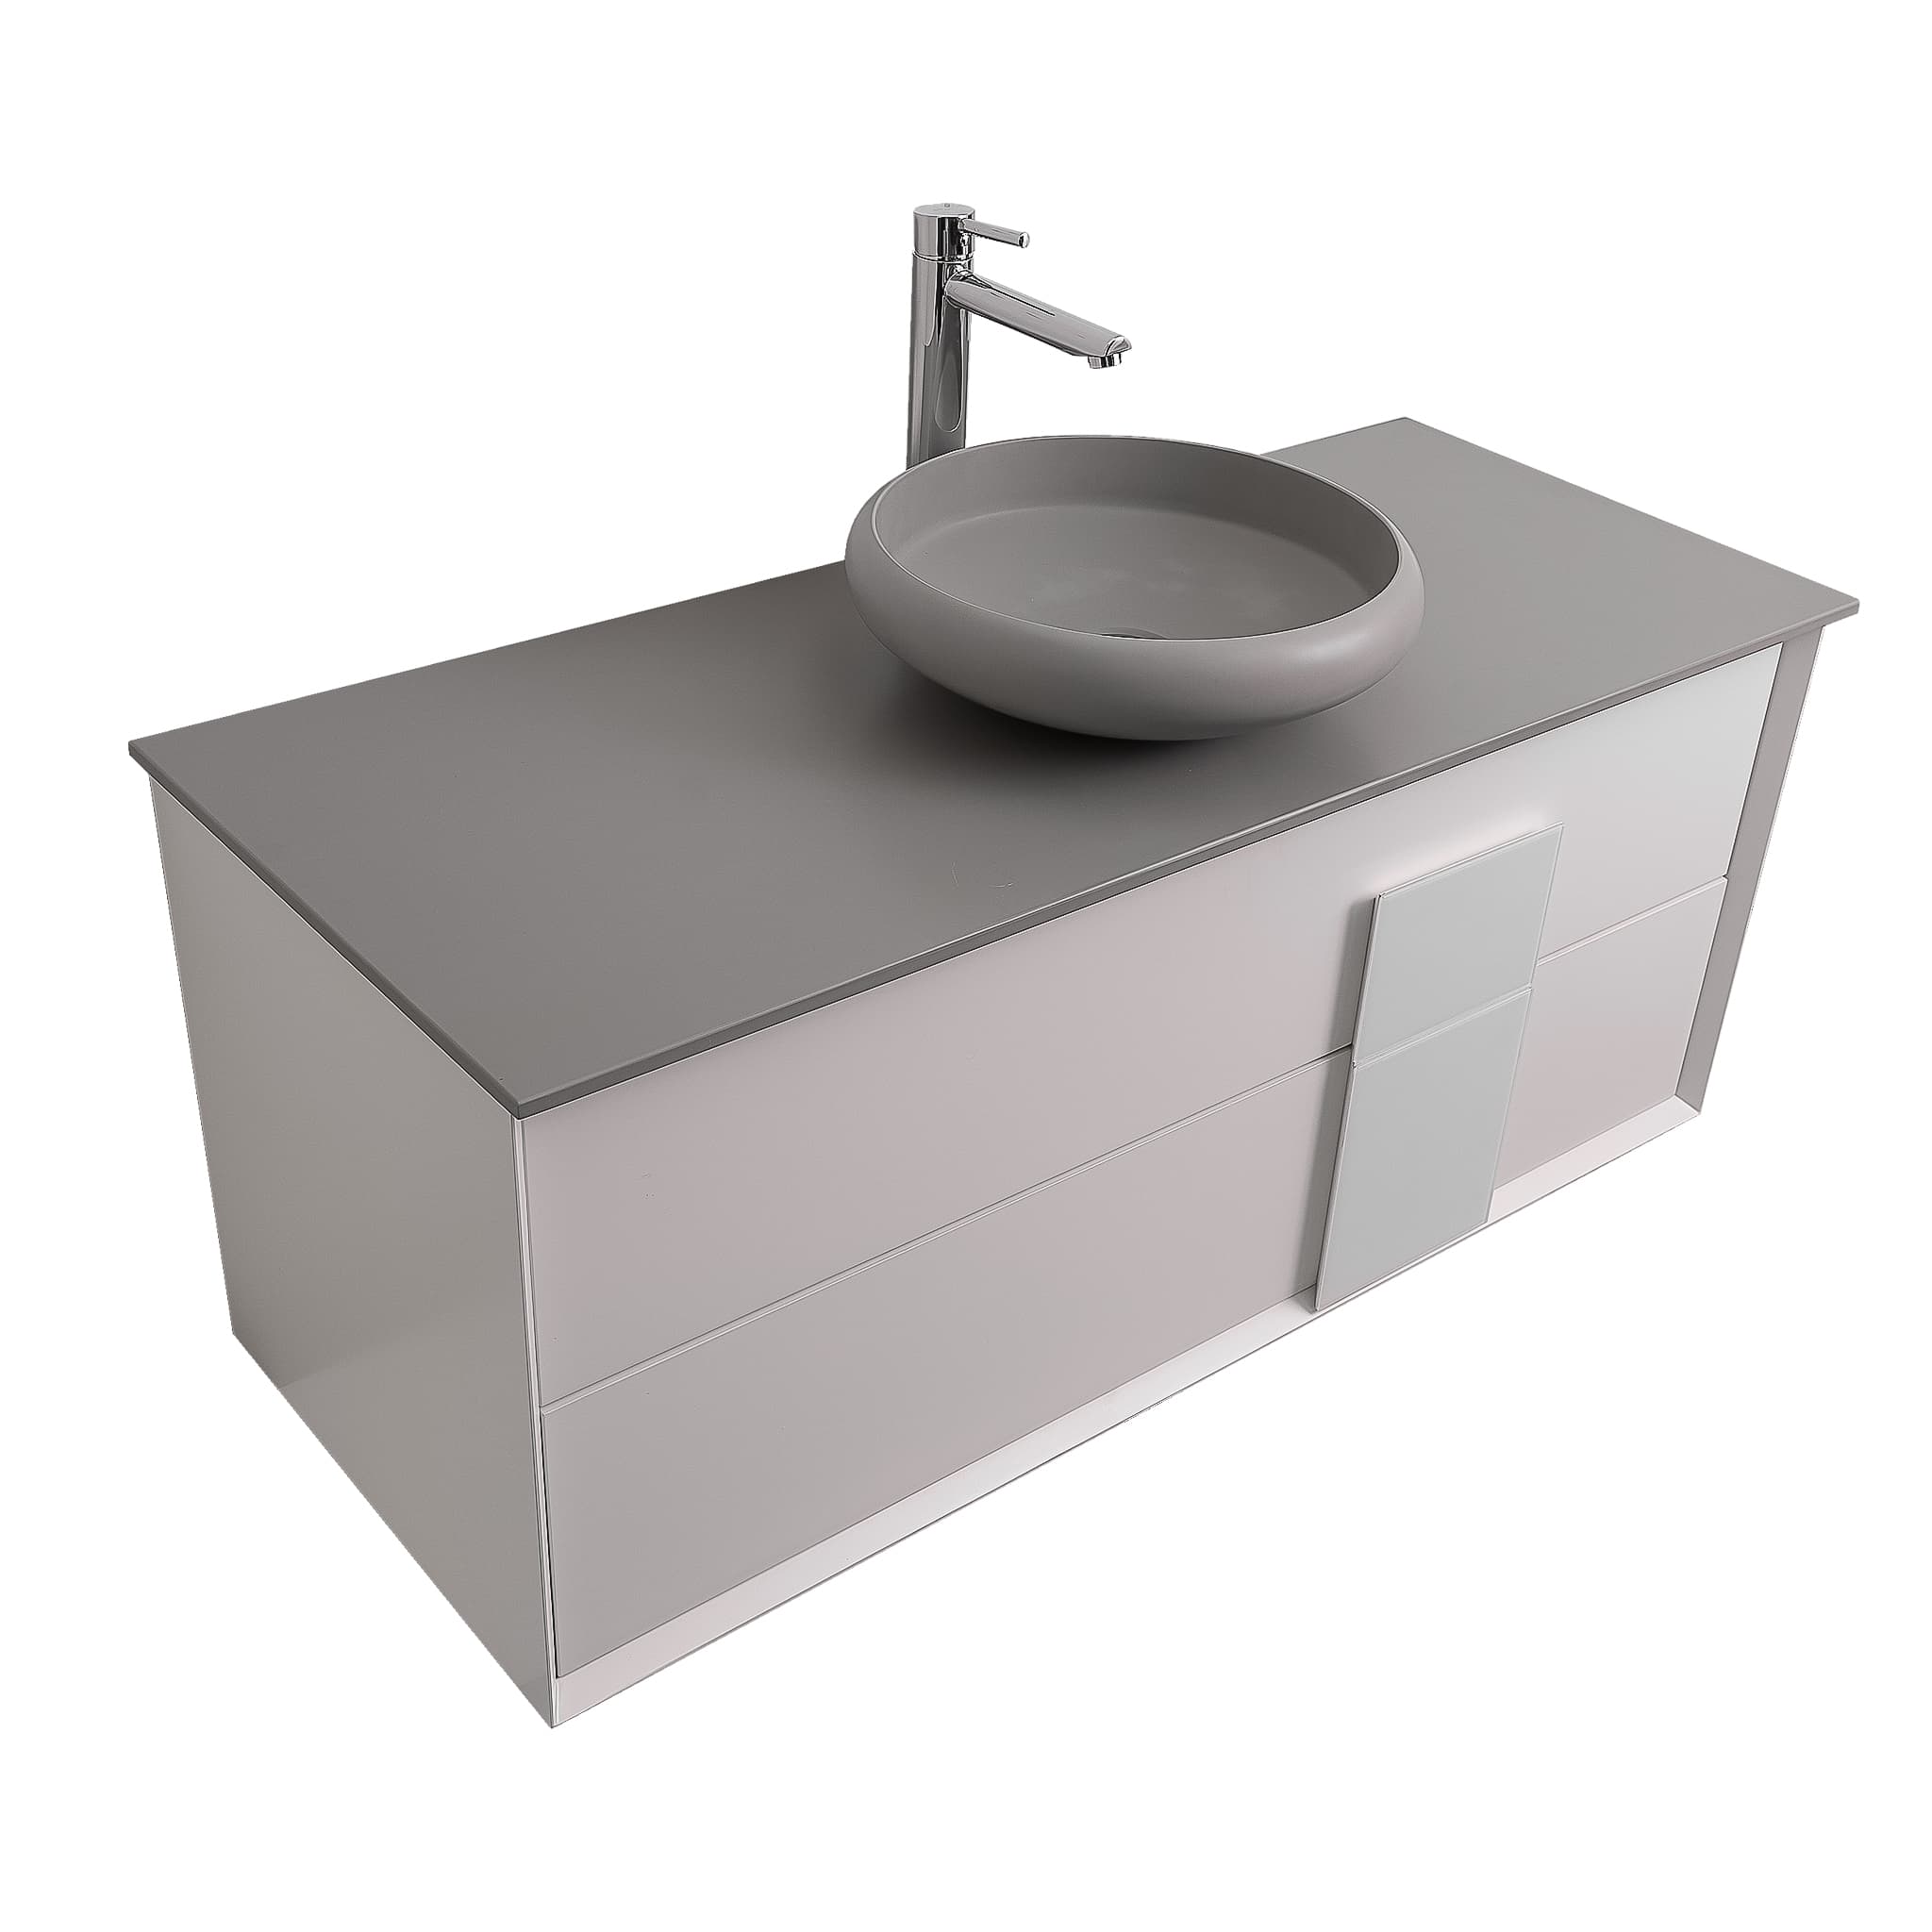 Piazza 47.5 Matte White With White Handle Cabinet, Solid Surface Flat Grey Counter and Round Solid Surface Grey Basin 1153, Wall Mounted Modern Vanity Set